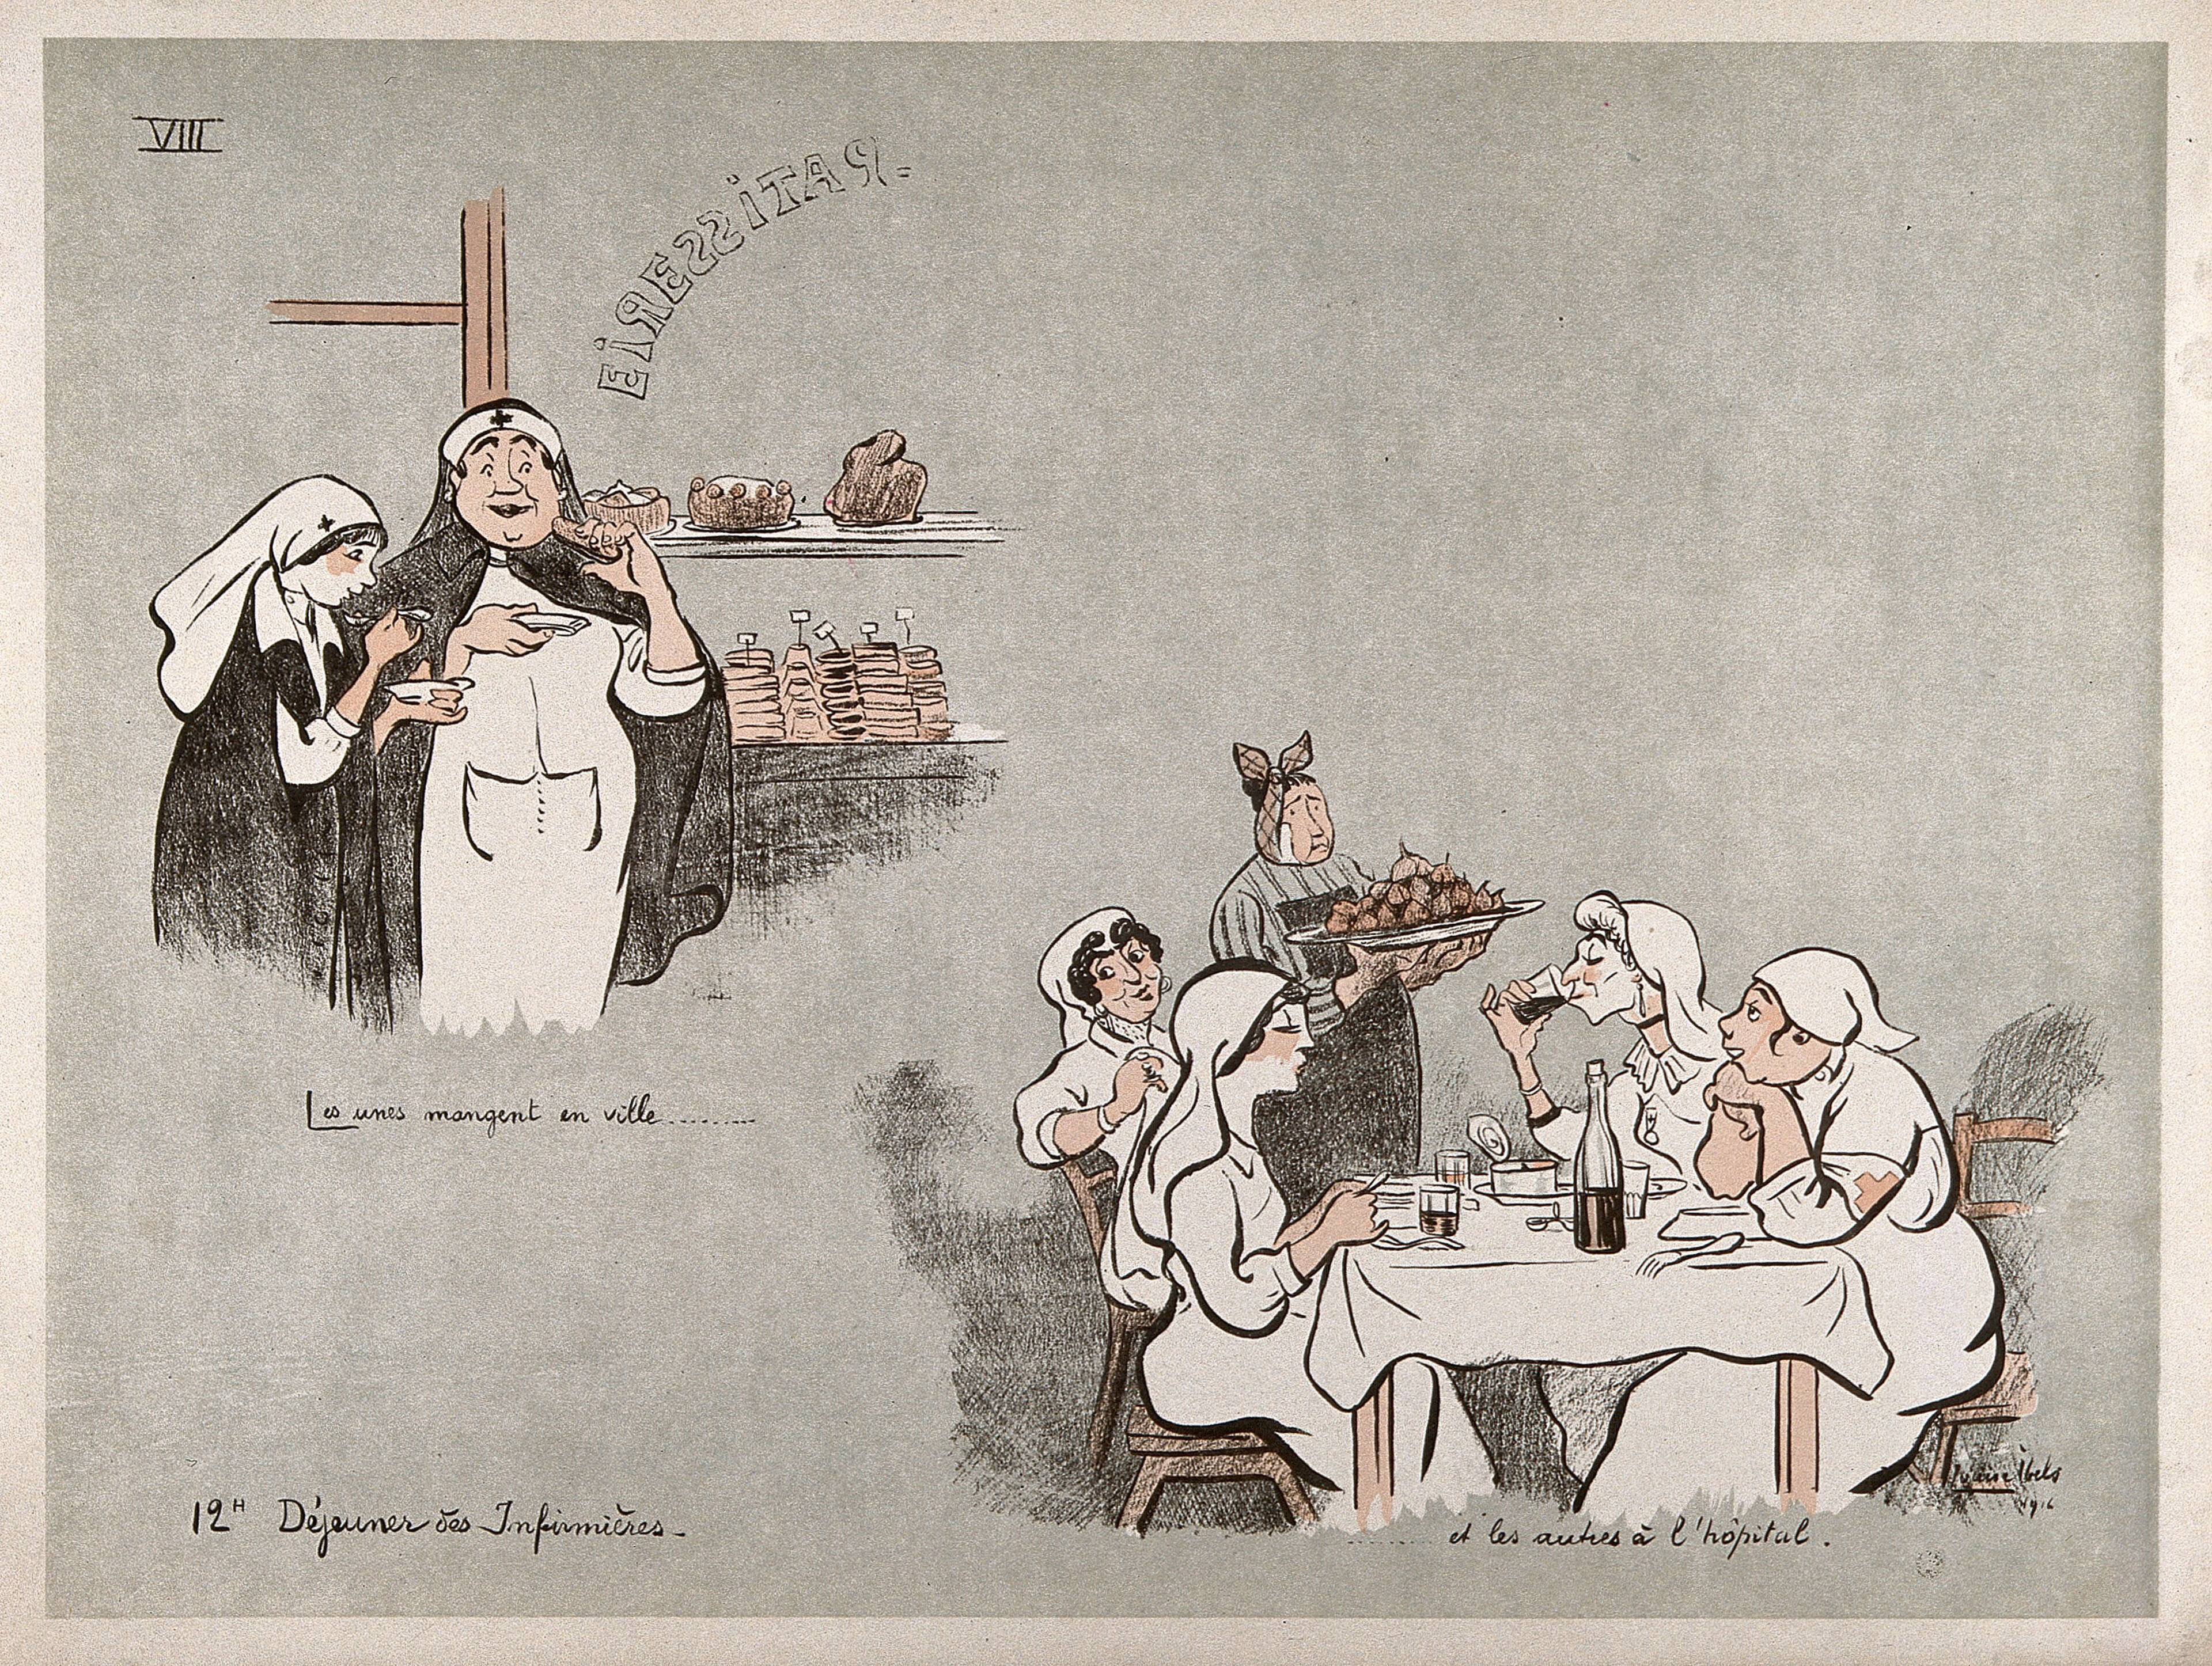 A French hospital for wounded soldiers, World War I: two nurses have lunch at a patisserie, the others have a drunken meal at the hospital. Colour lithograph after L. Ibels, 1916.